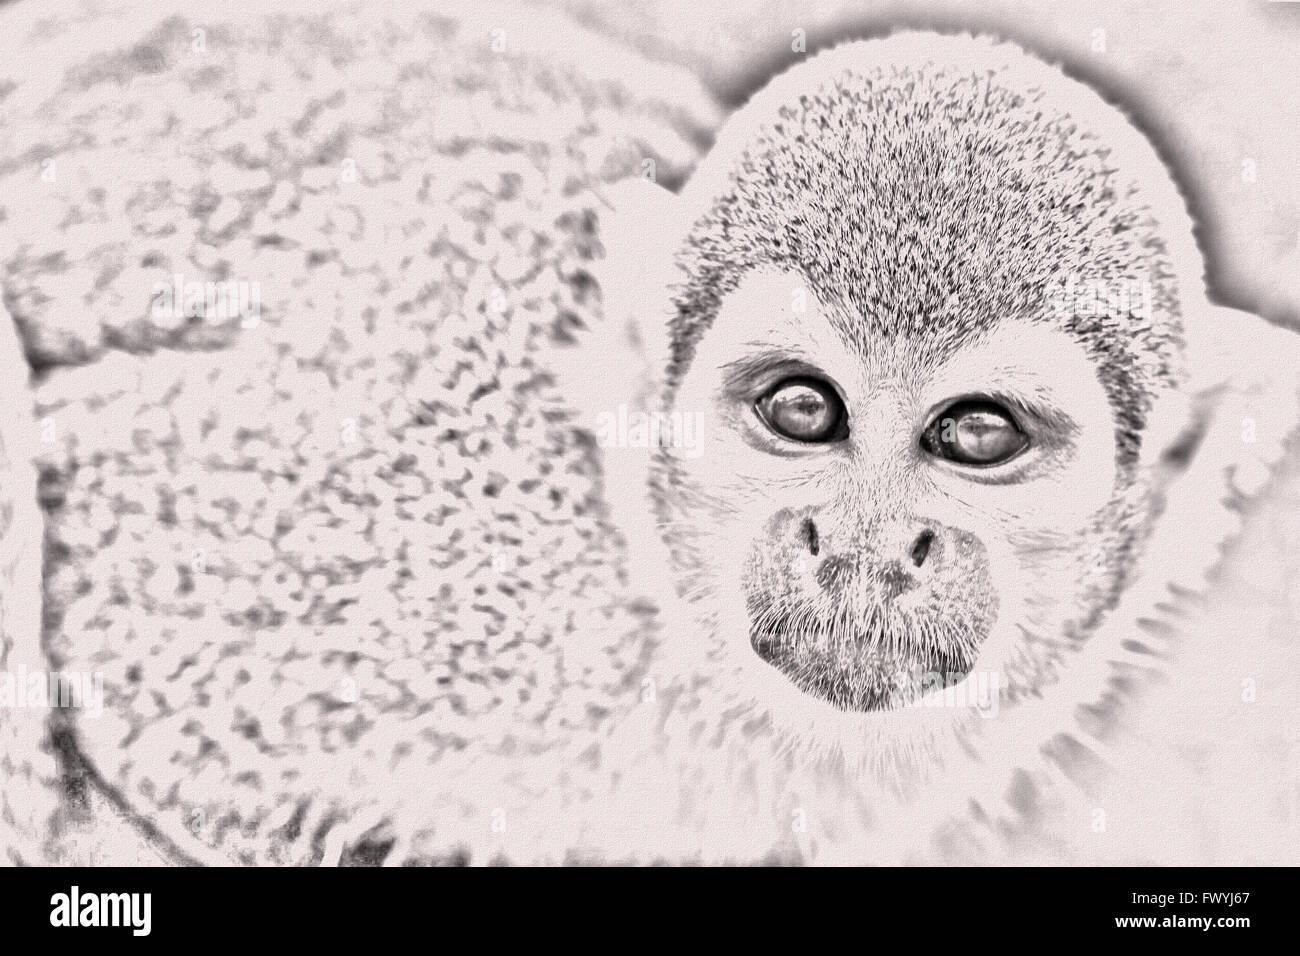 Black And White Portrait Of Cute Small Common Squirrel Monkey Standing And Attentively Looking Curiously At The Camera Stock Photo